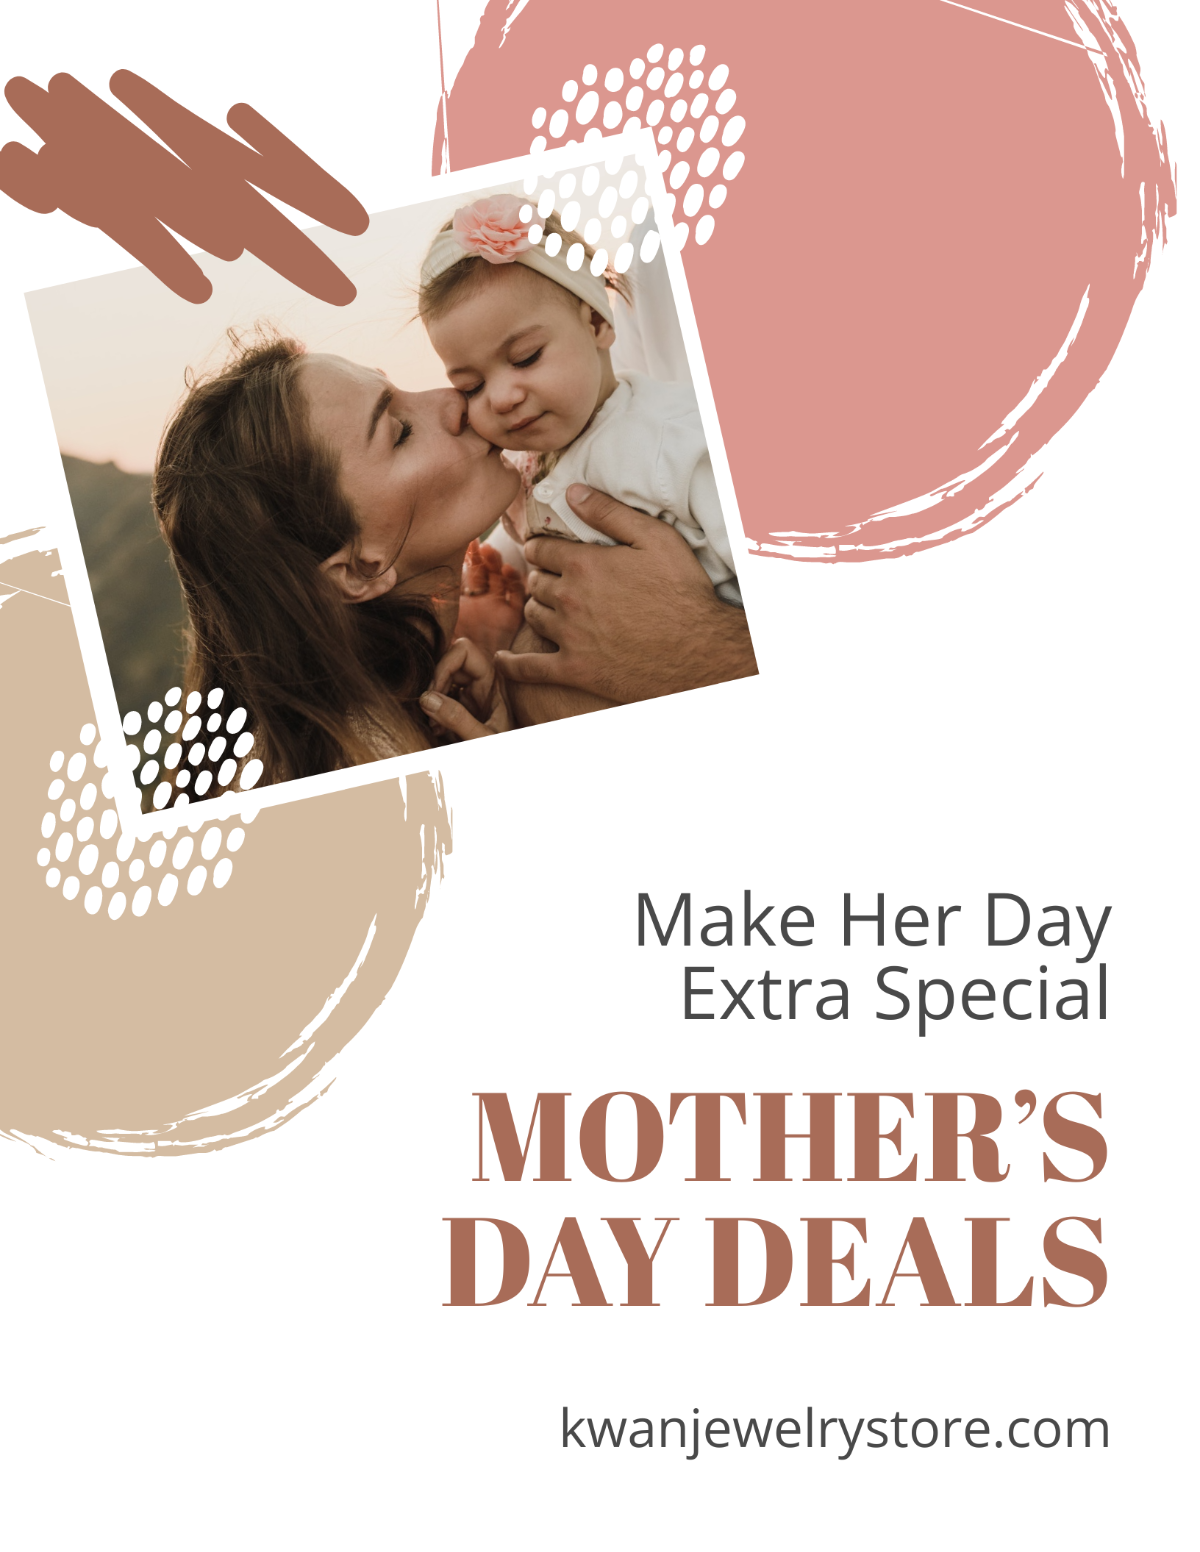 Mother's Day Deals Flyer Template